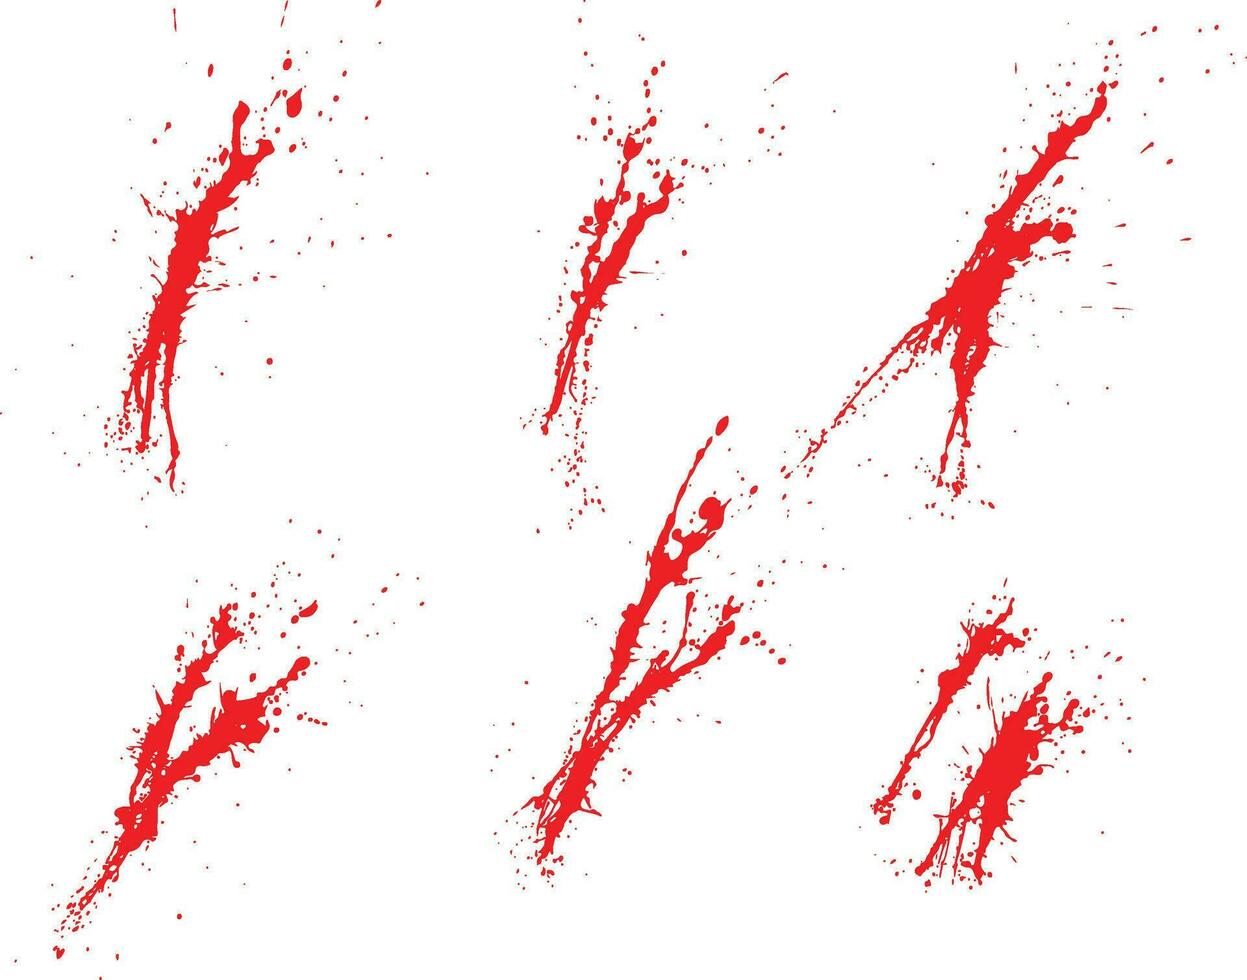 Blood splat horror paint vector collection